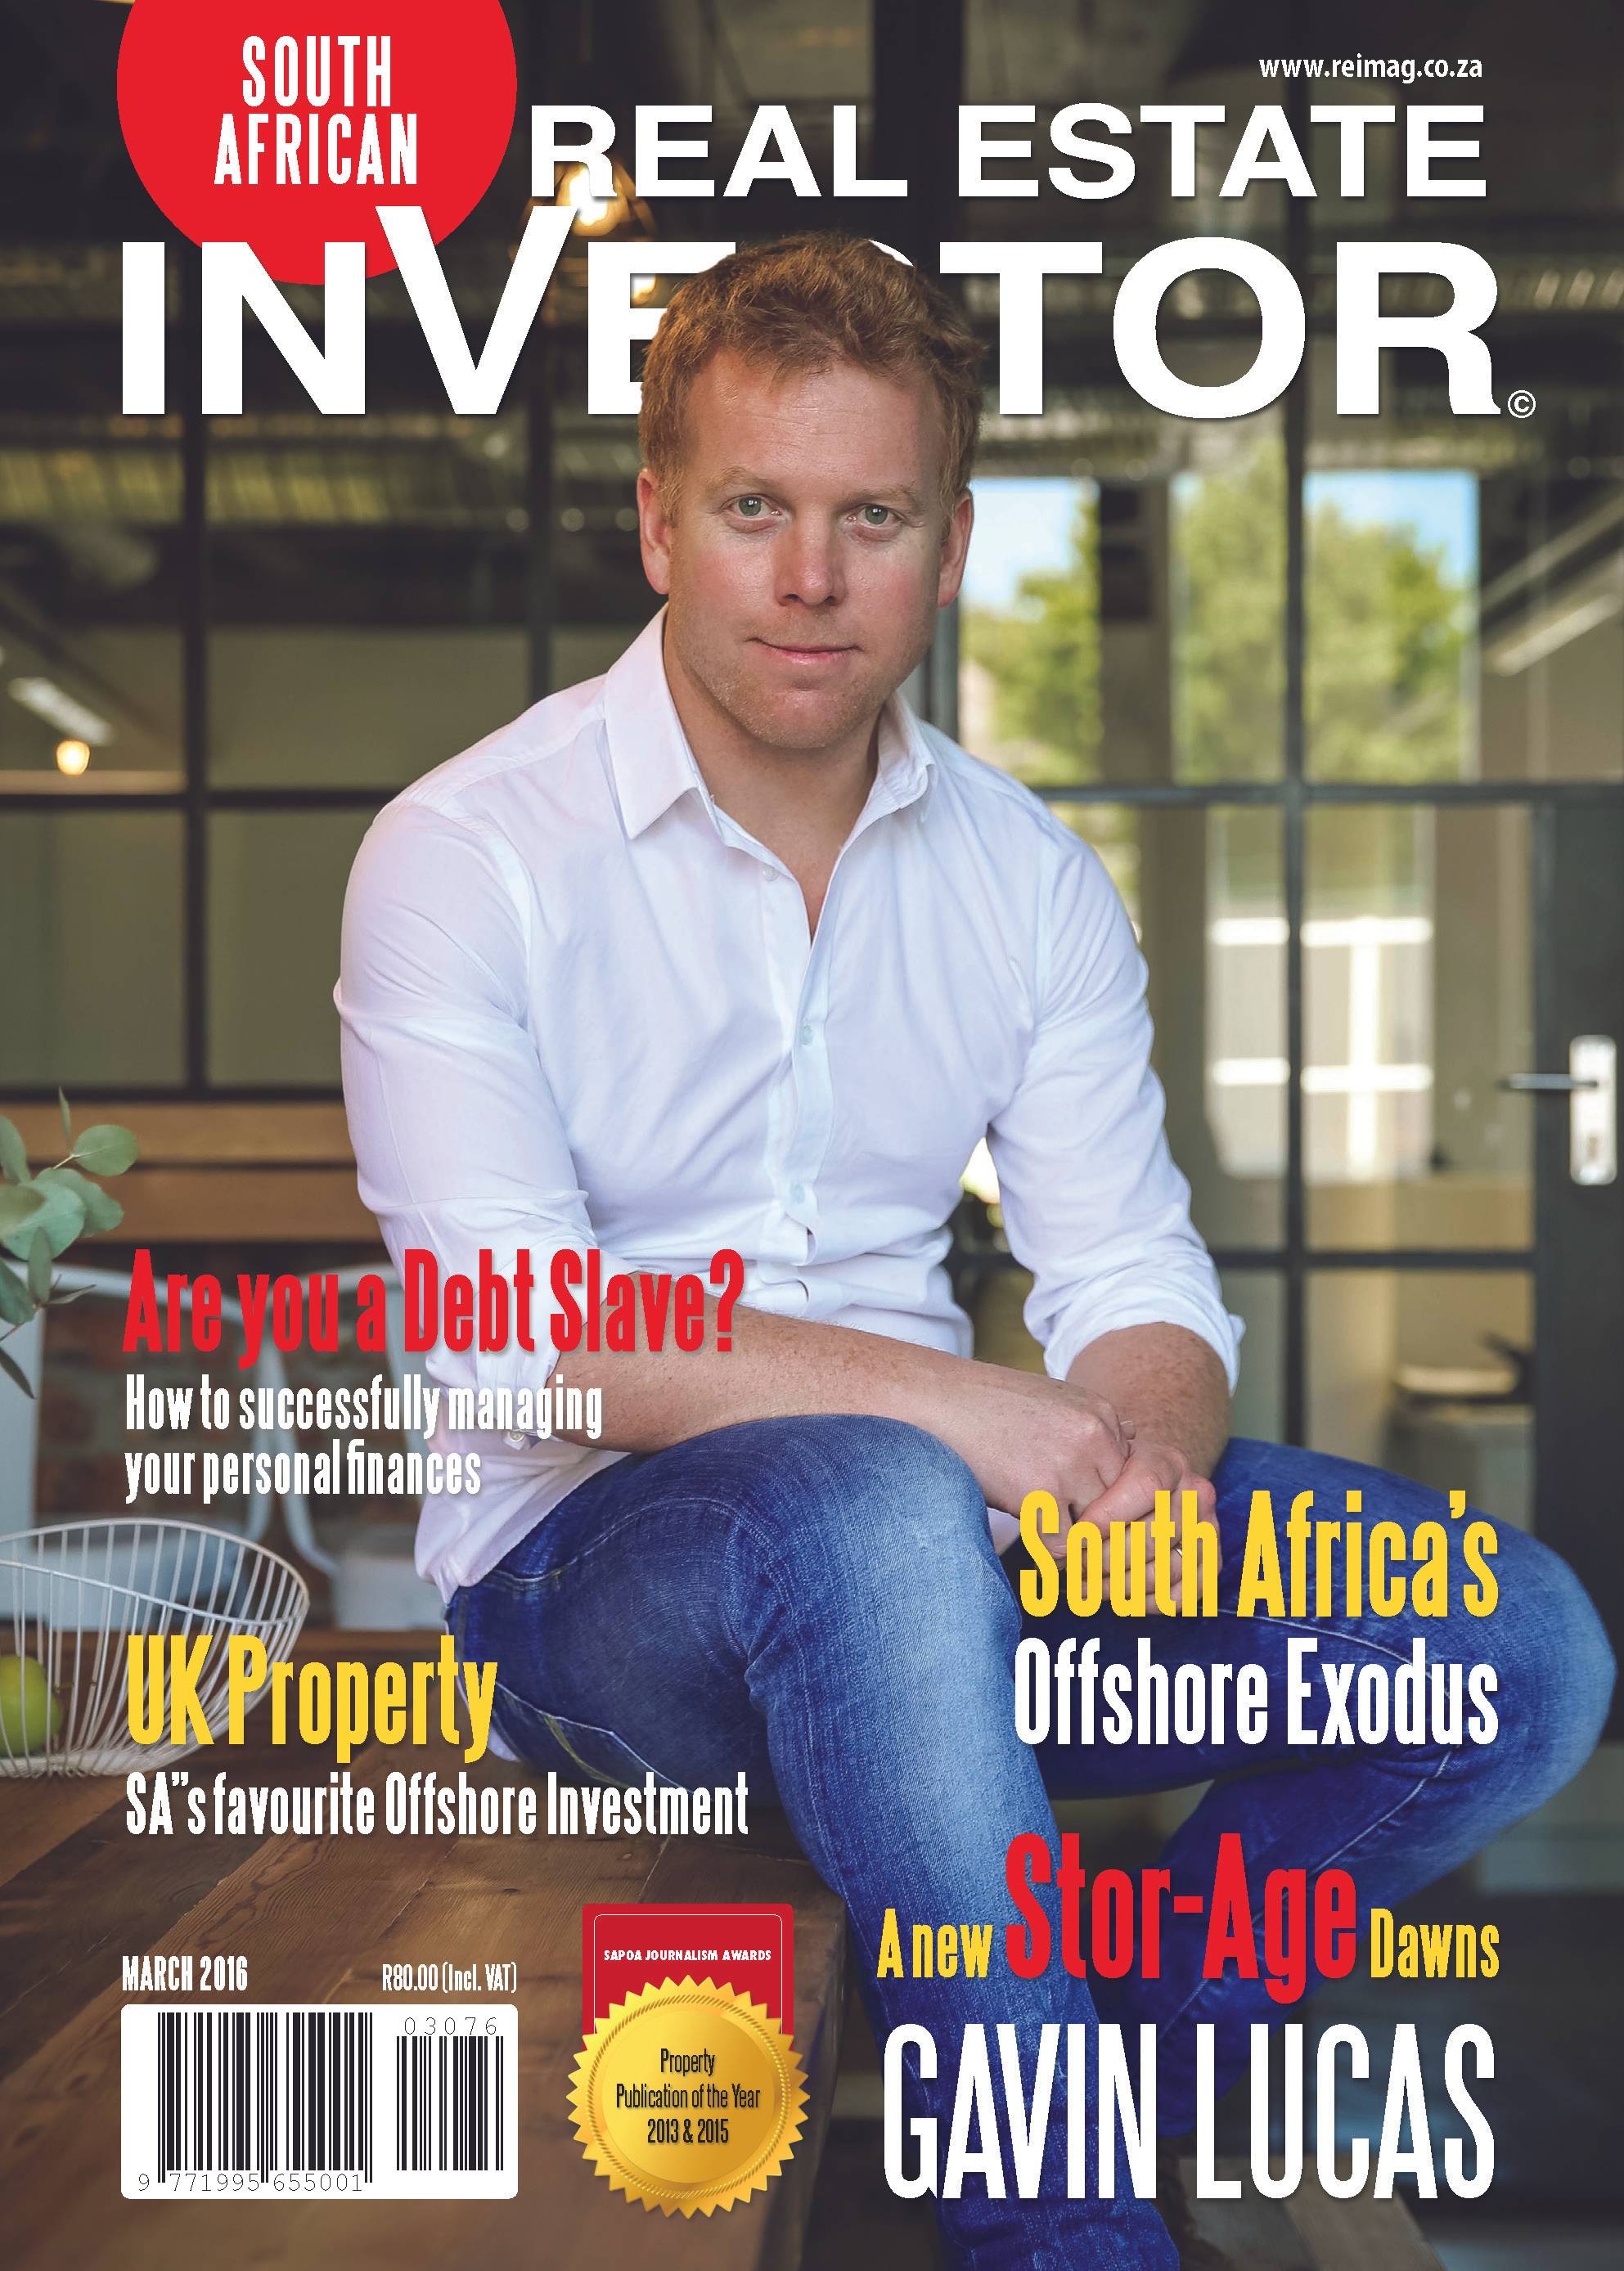 Real Estate Investor Magazine - Issue 77 - March 2016 